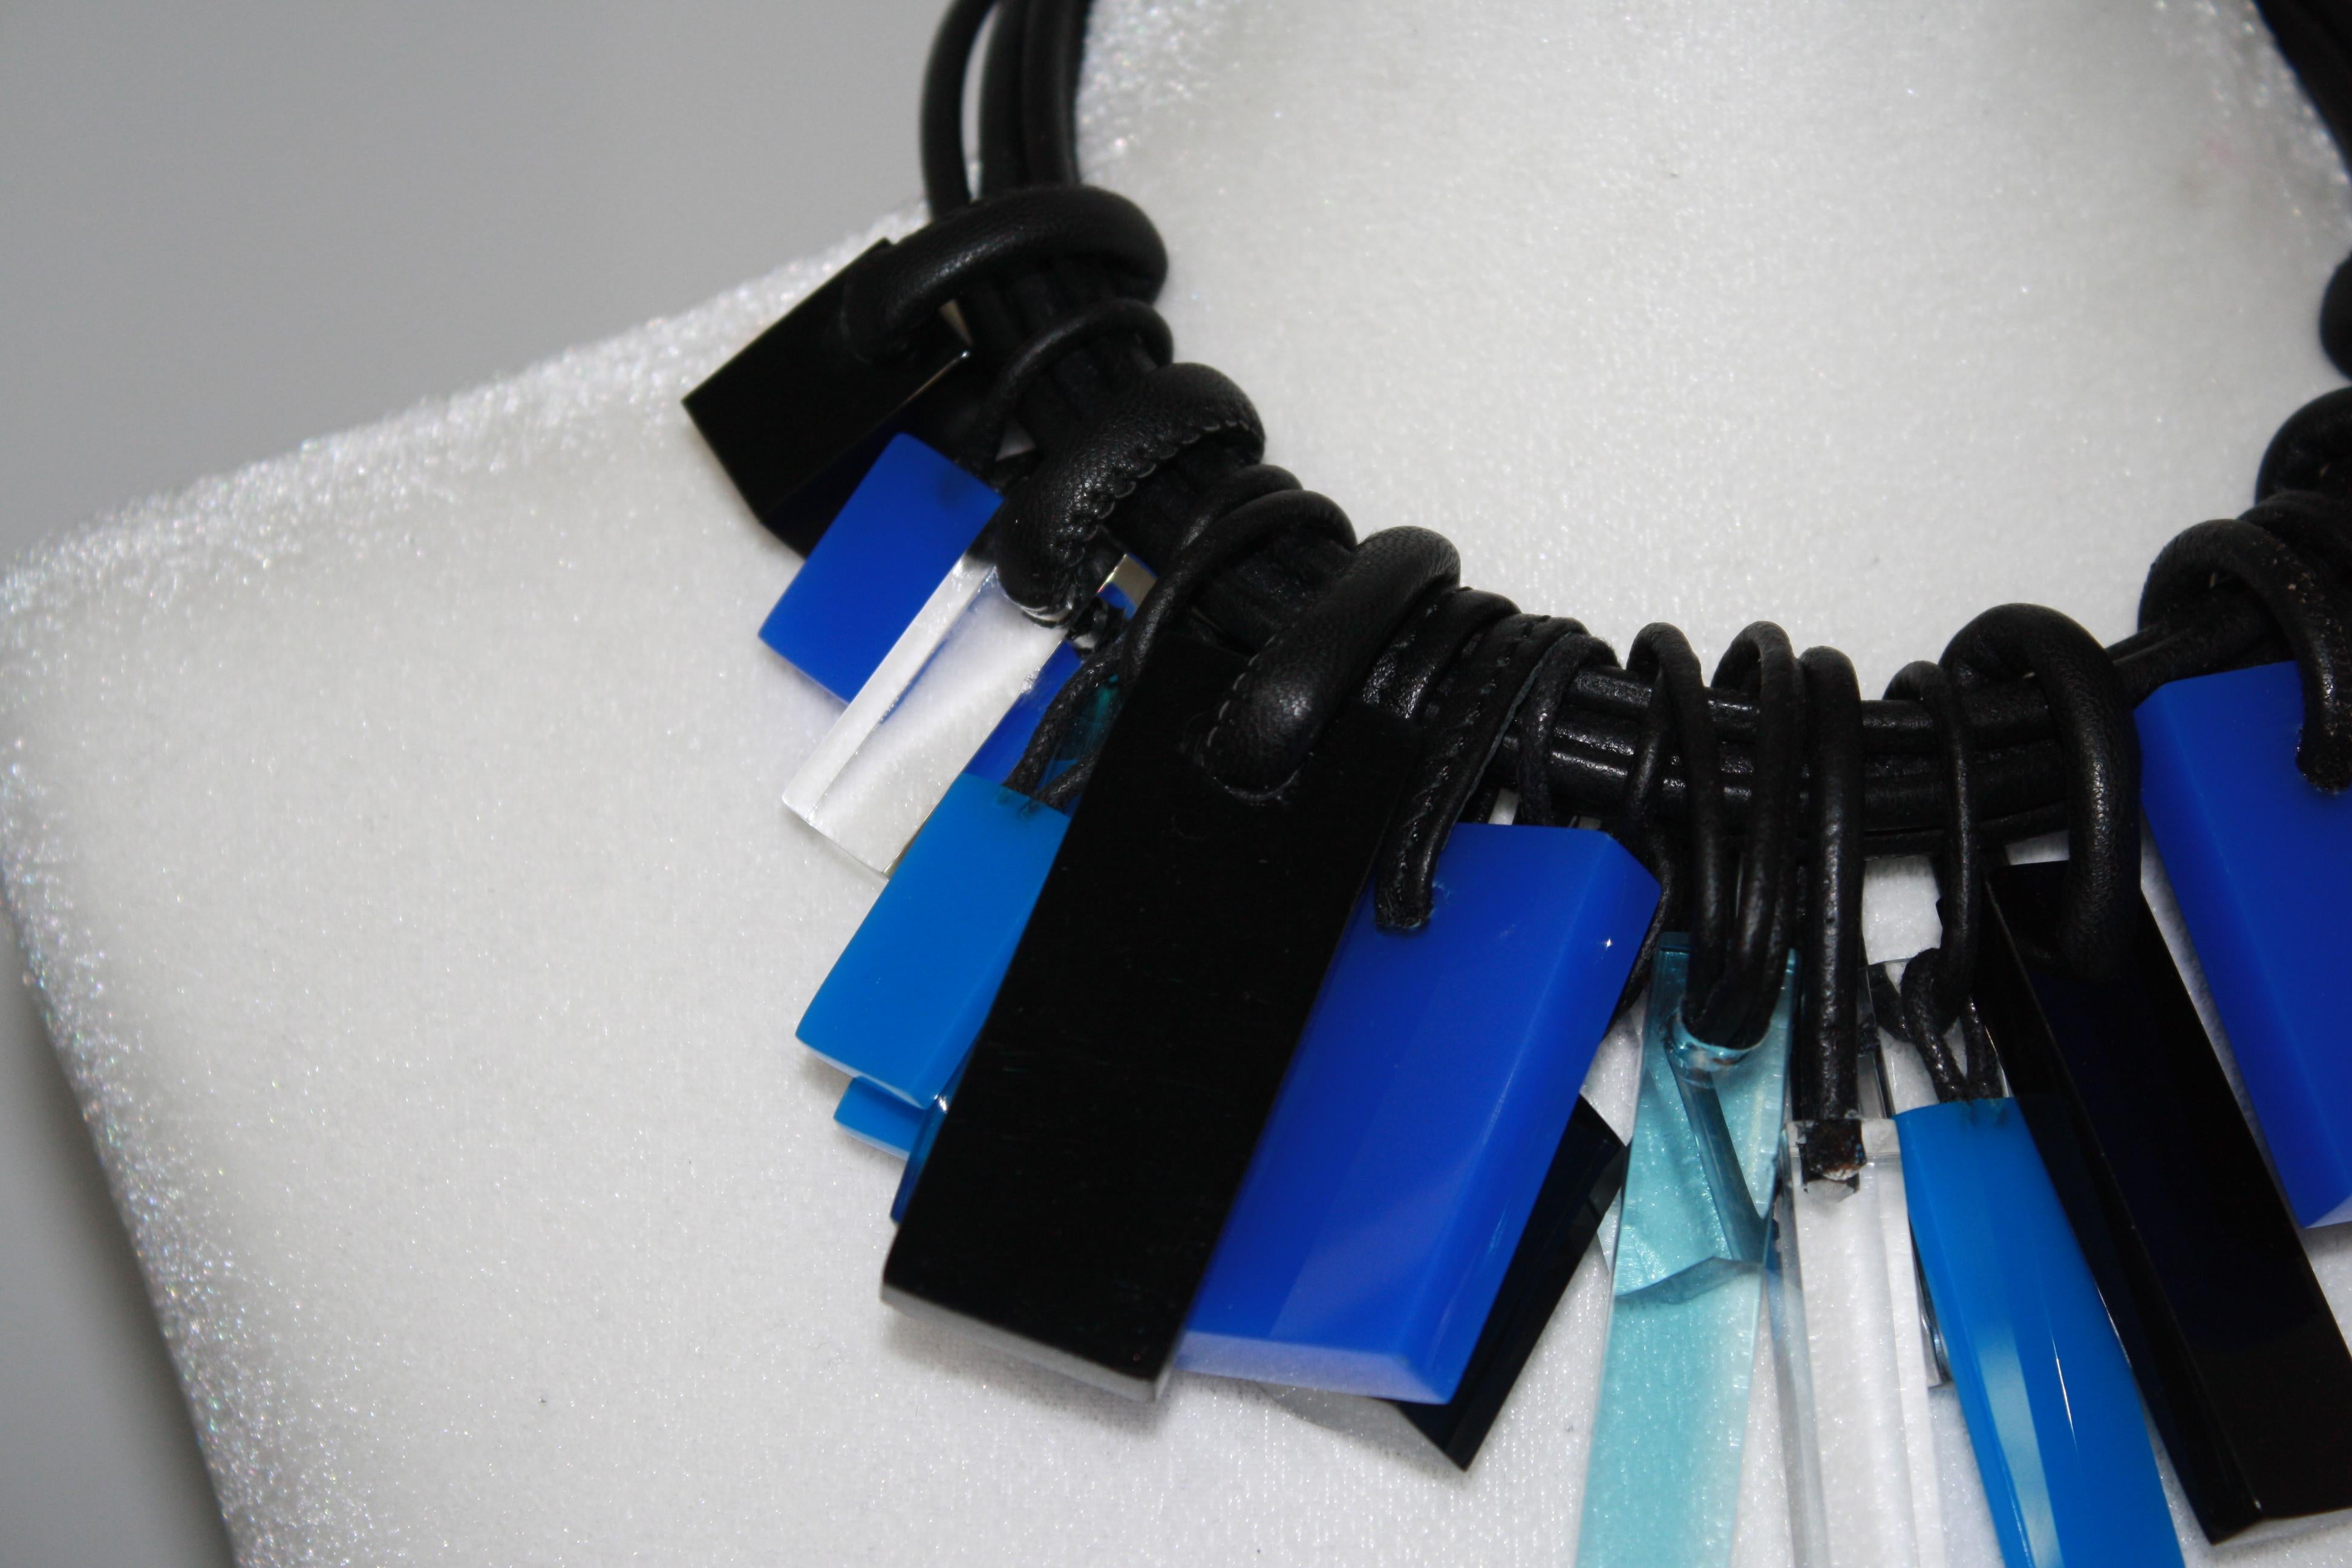 5 strands of black leather with a hook and eye clasp finished with a cube of acrylic. Black, blue polyester i and clear acrylic geometric shapes with leather rings are sliding on the choker..
A fabulous statement necklace you can wear all year round.